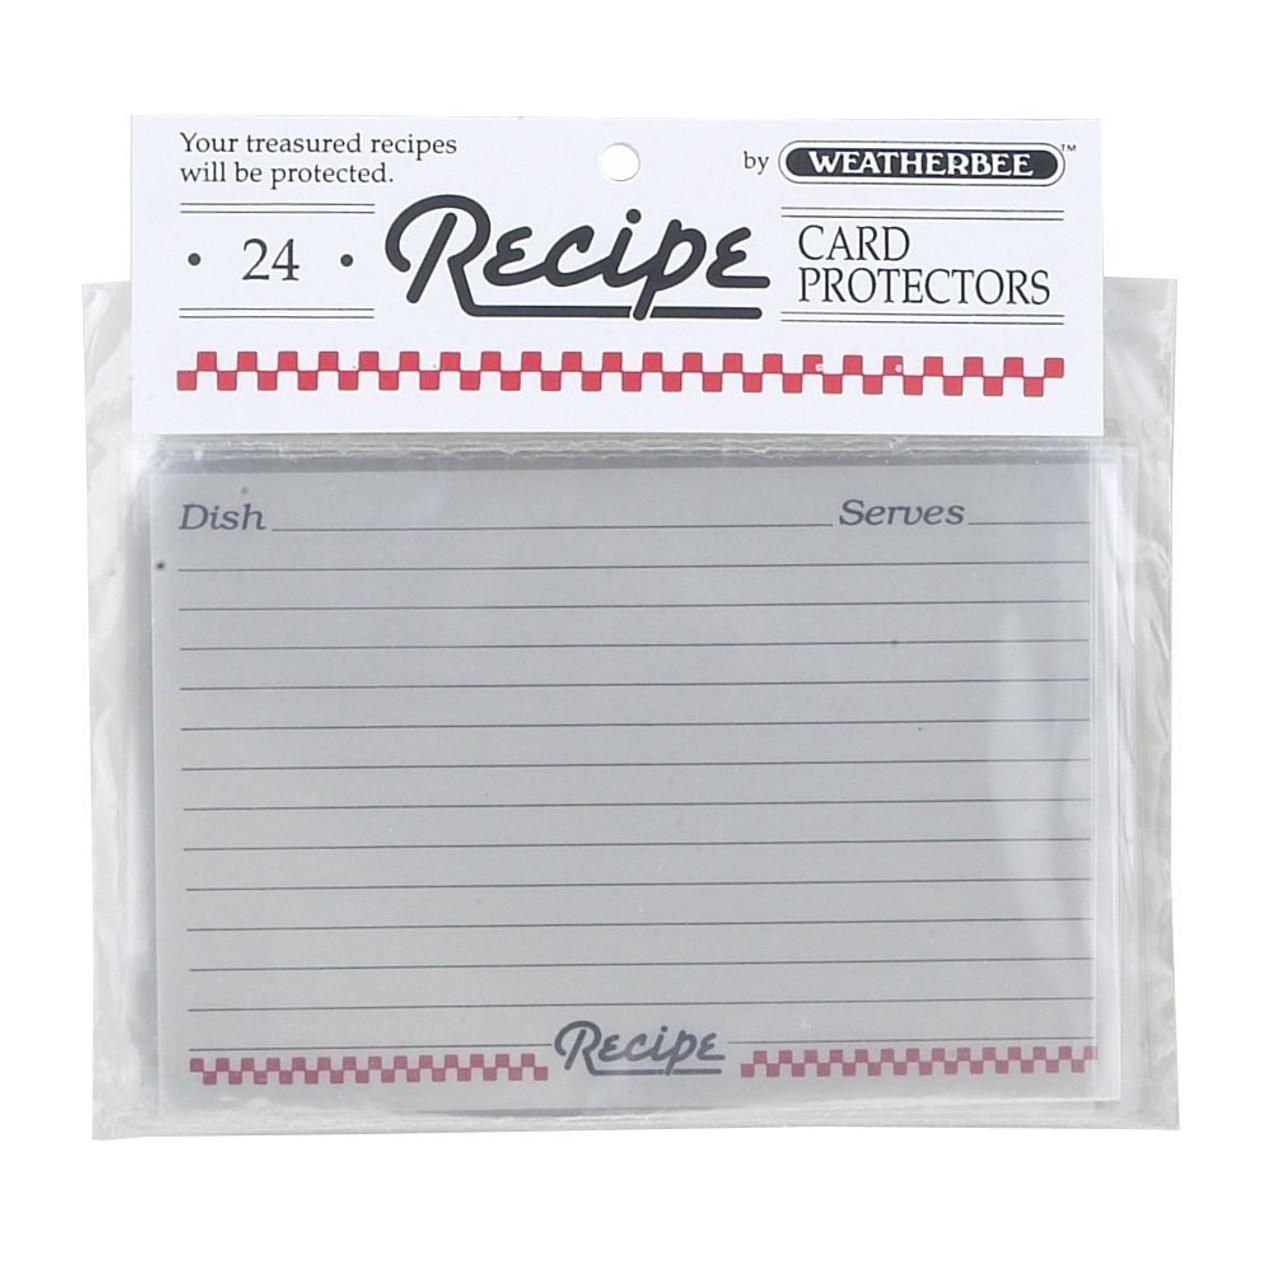 Weatherbee Recipe Cards Protector, 4" x 6", Set of 24 (HIC 076)